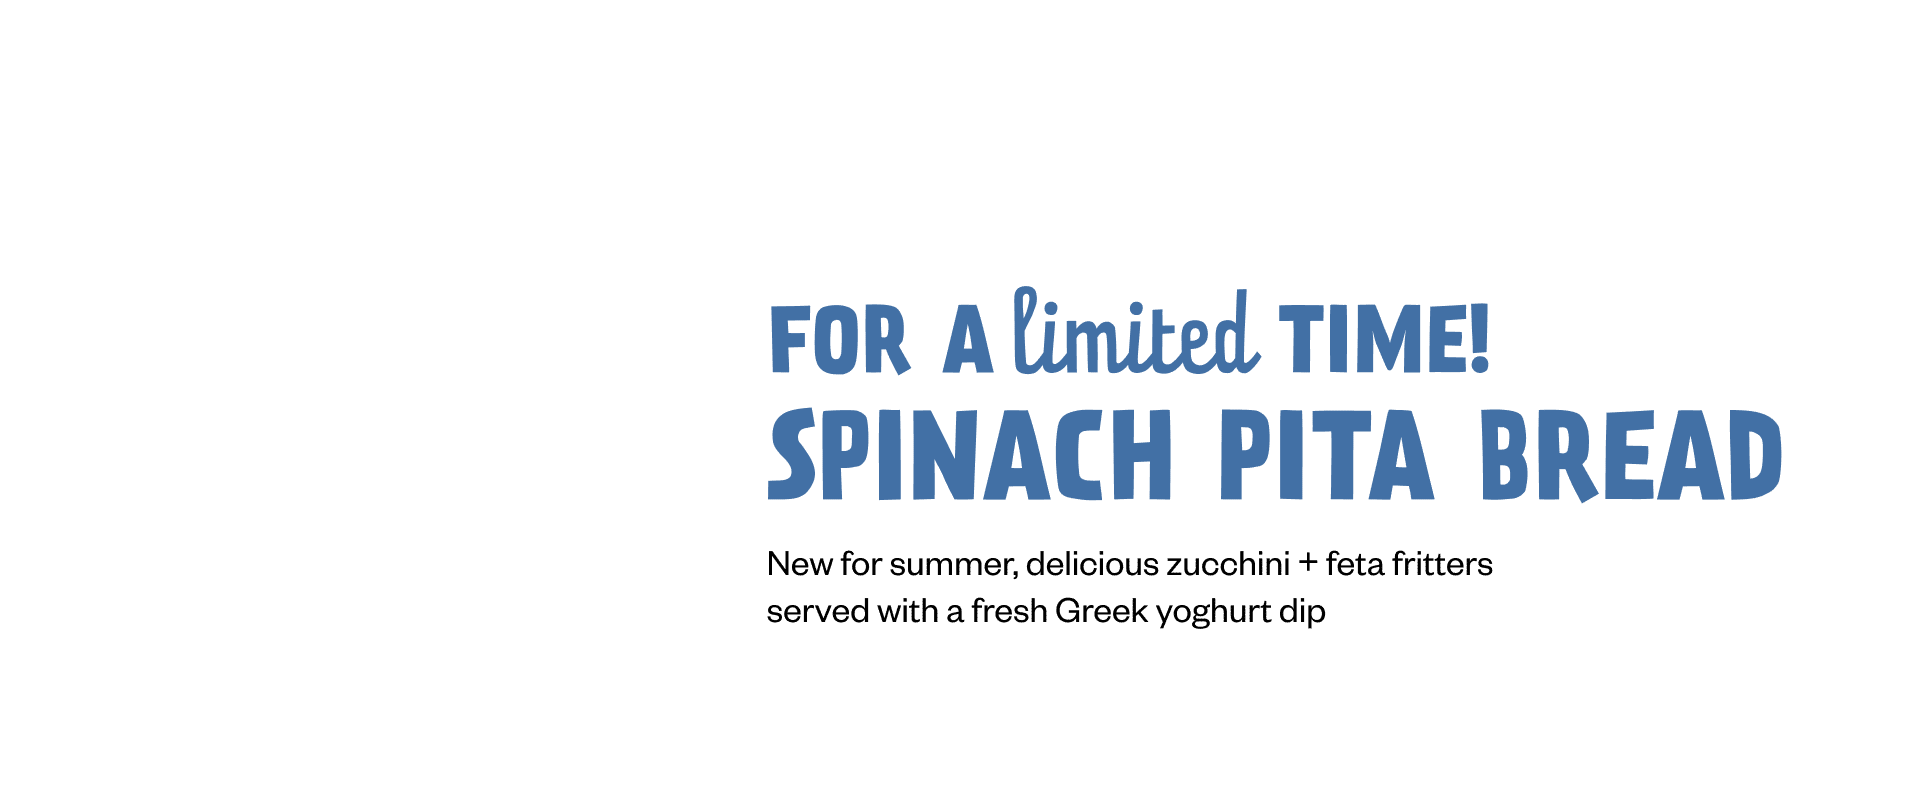 FOR A LIMITED TIME! SPINACH PITA BREAD